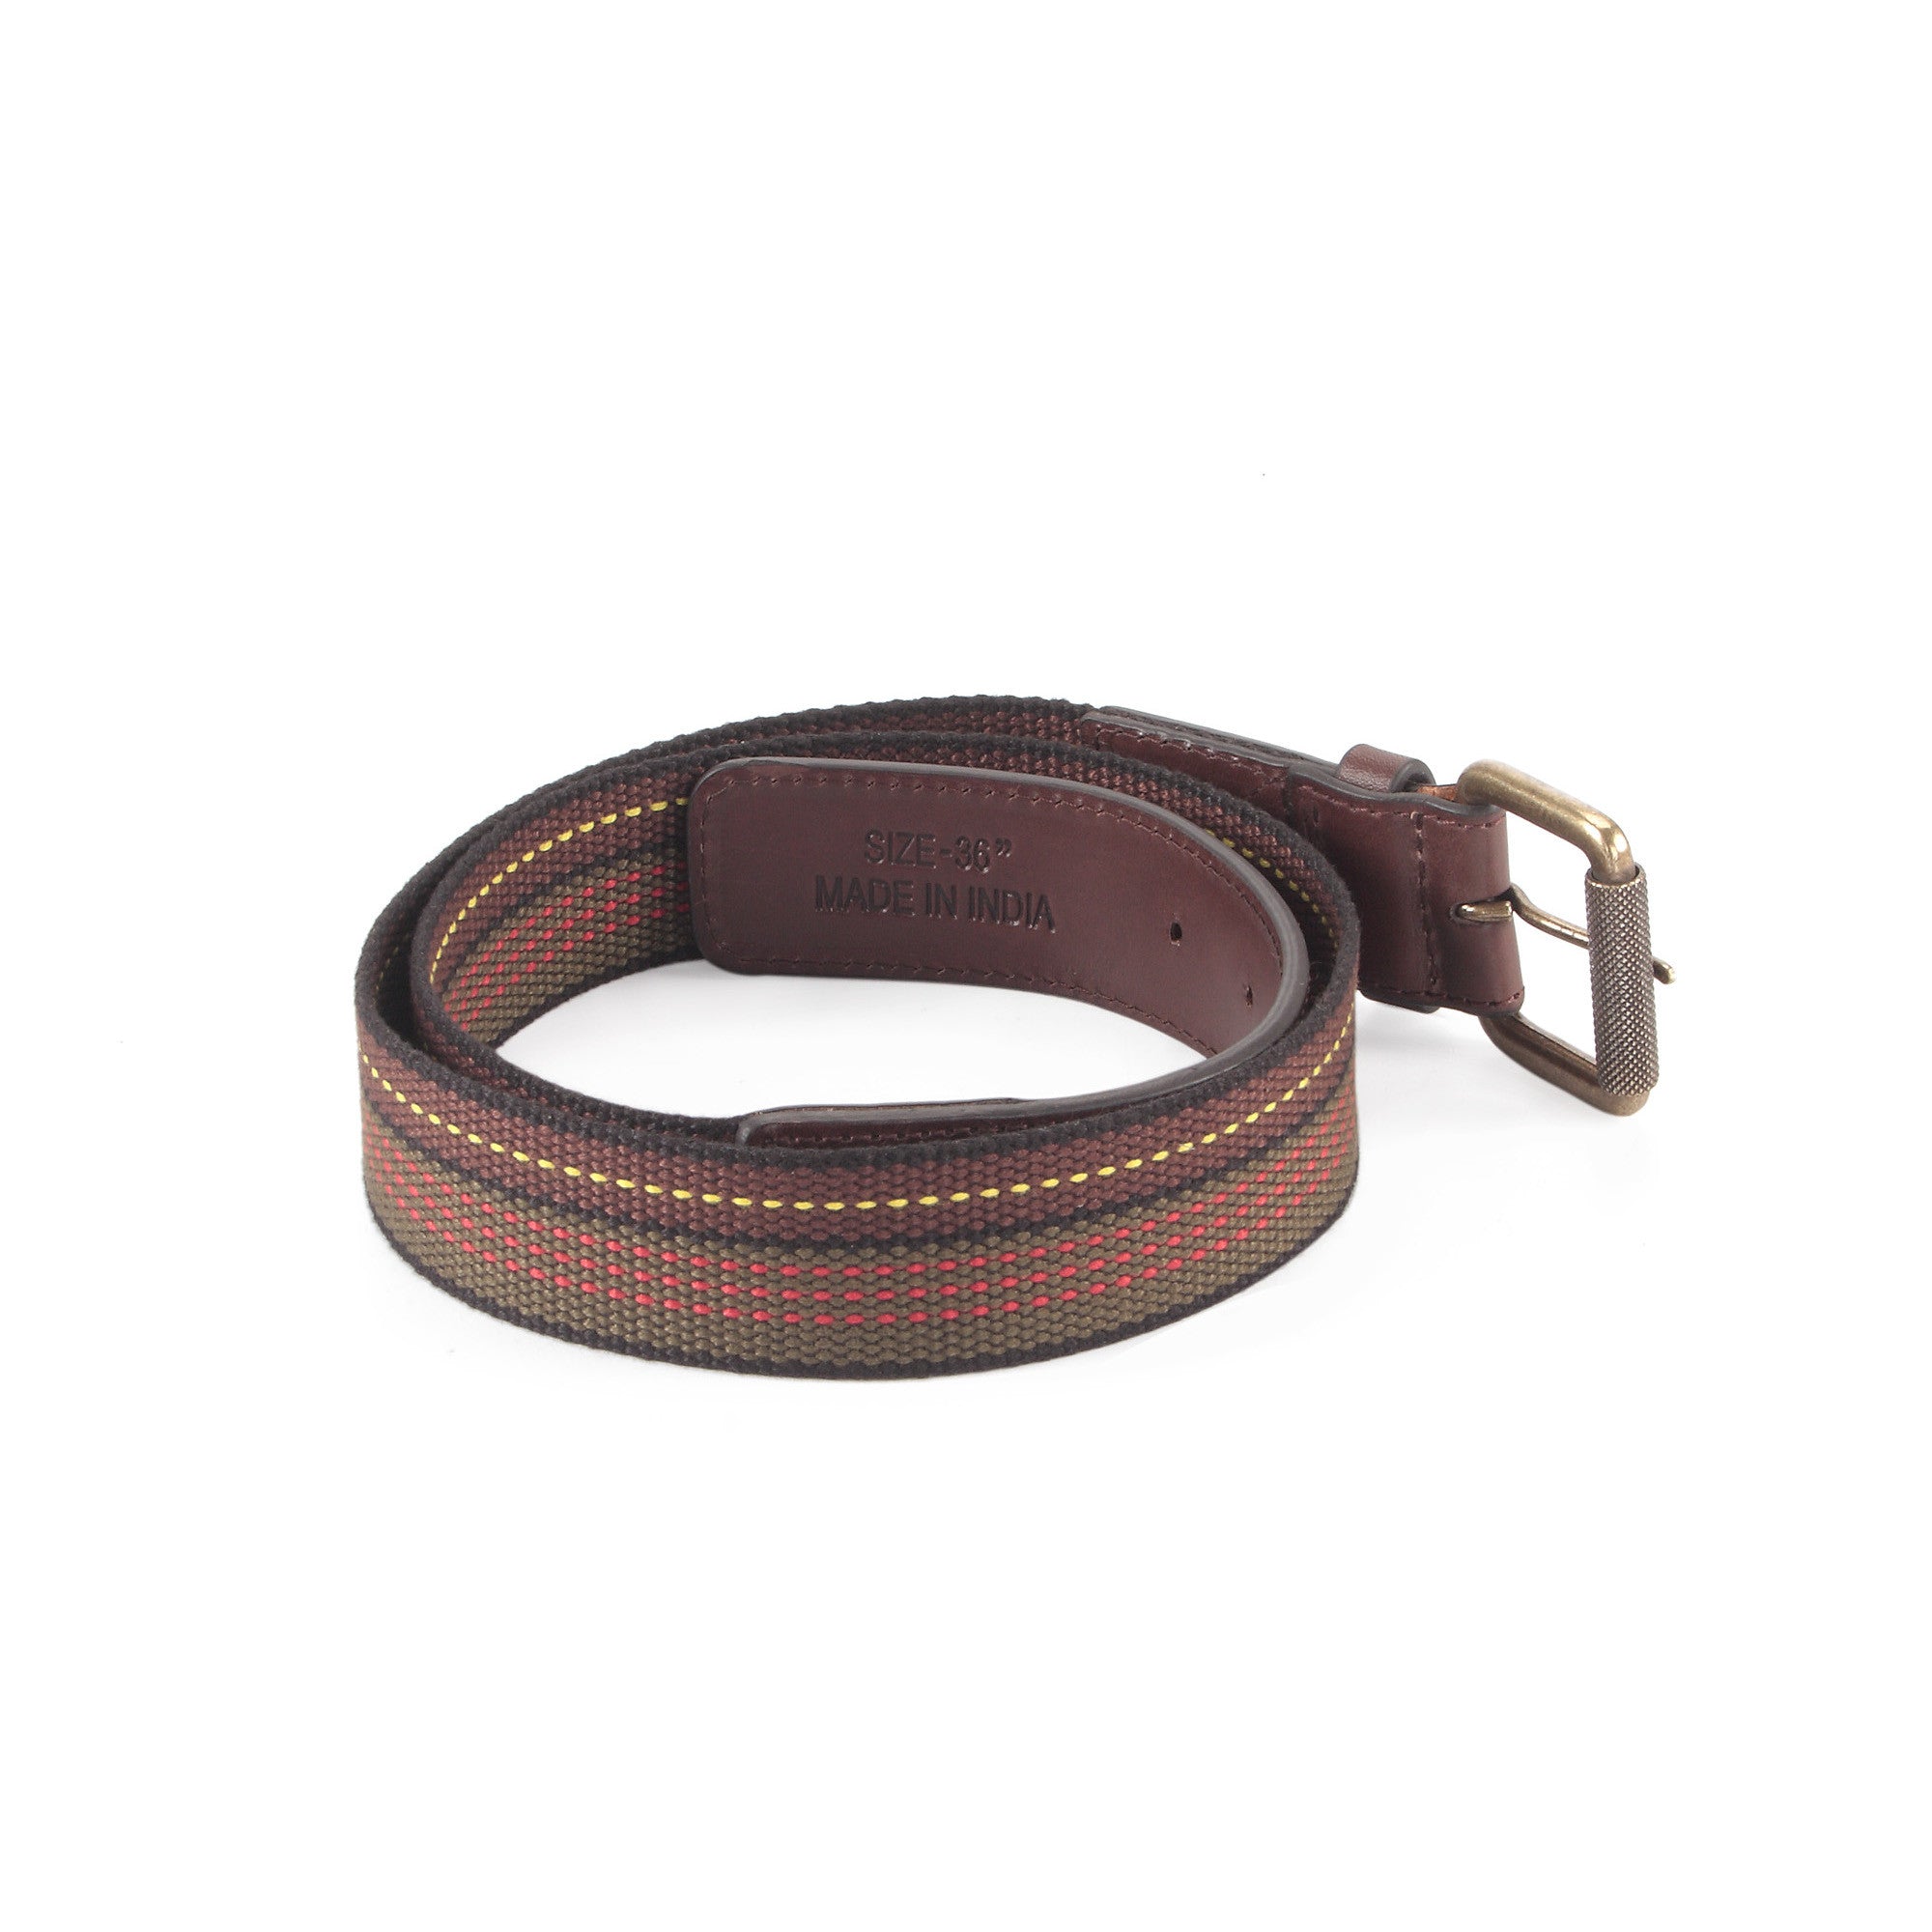 Formal & Casual Leather Belts | Handmade Leather Belts | Style n Craft